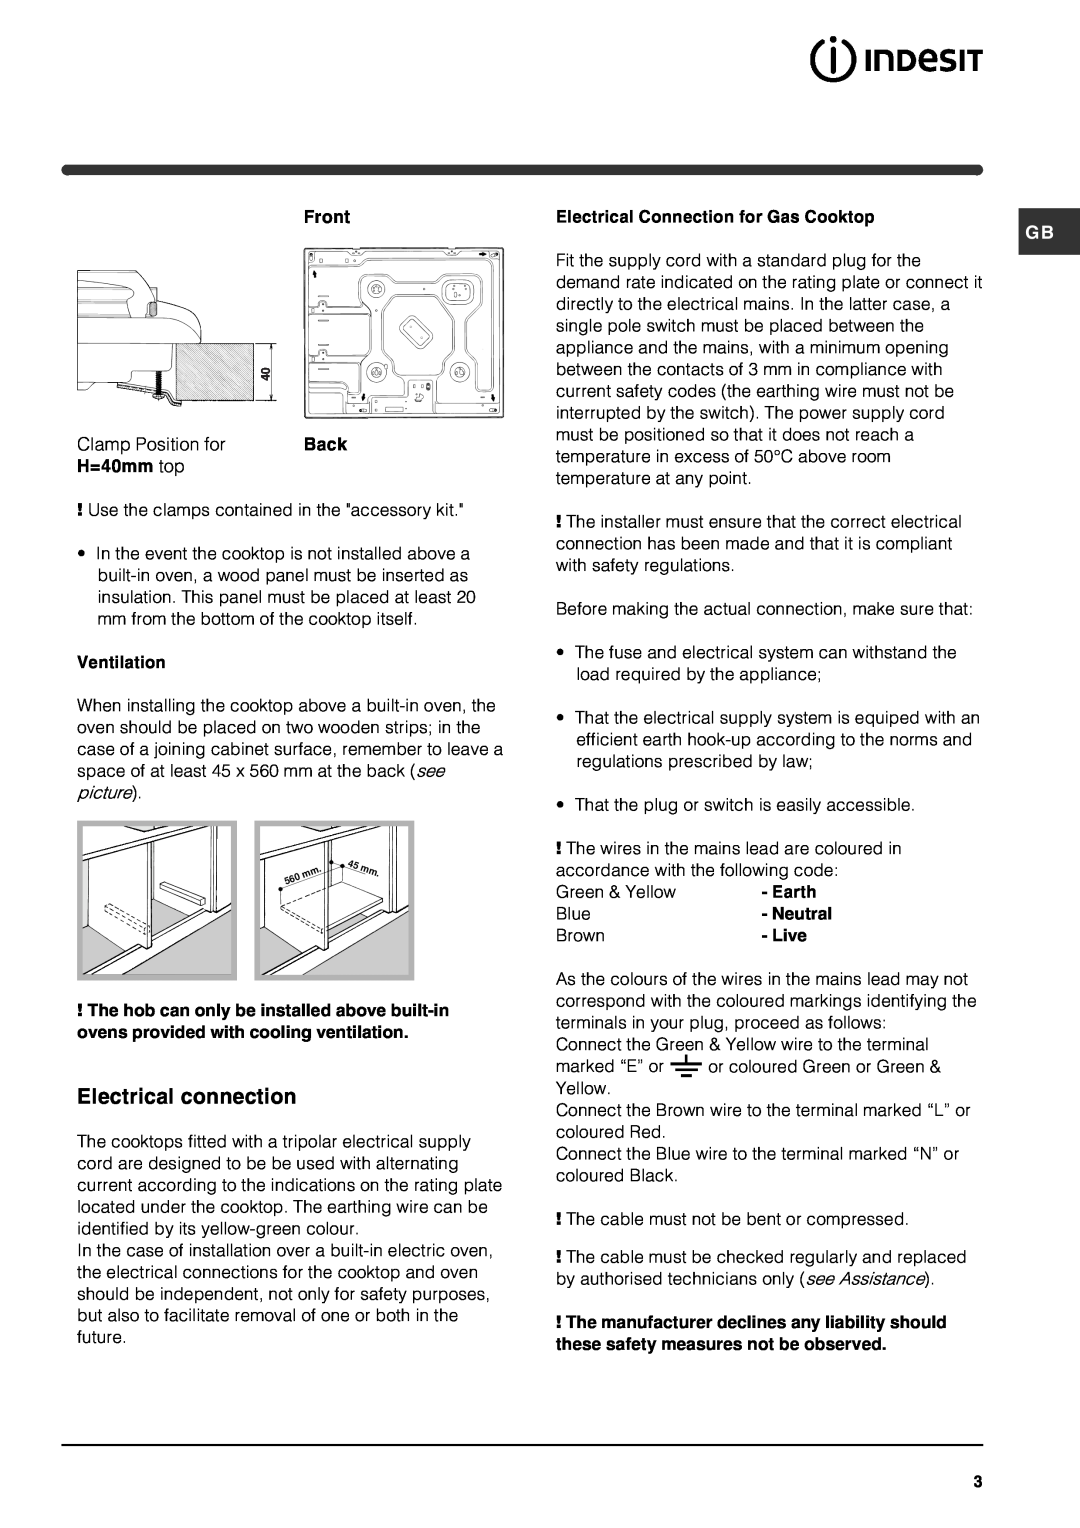 Indesit PI640 TC GB manual Electrical connection 